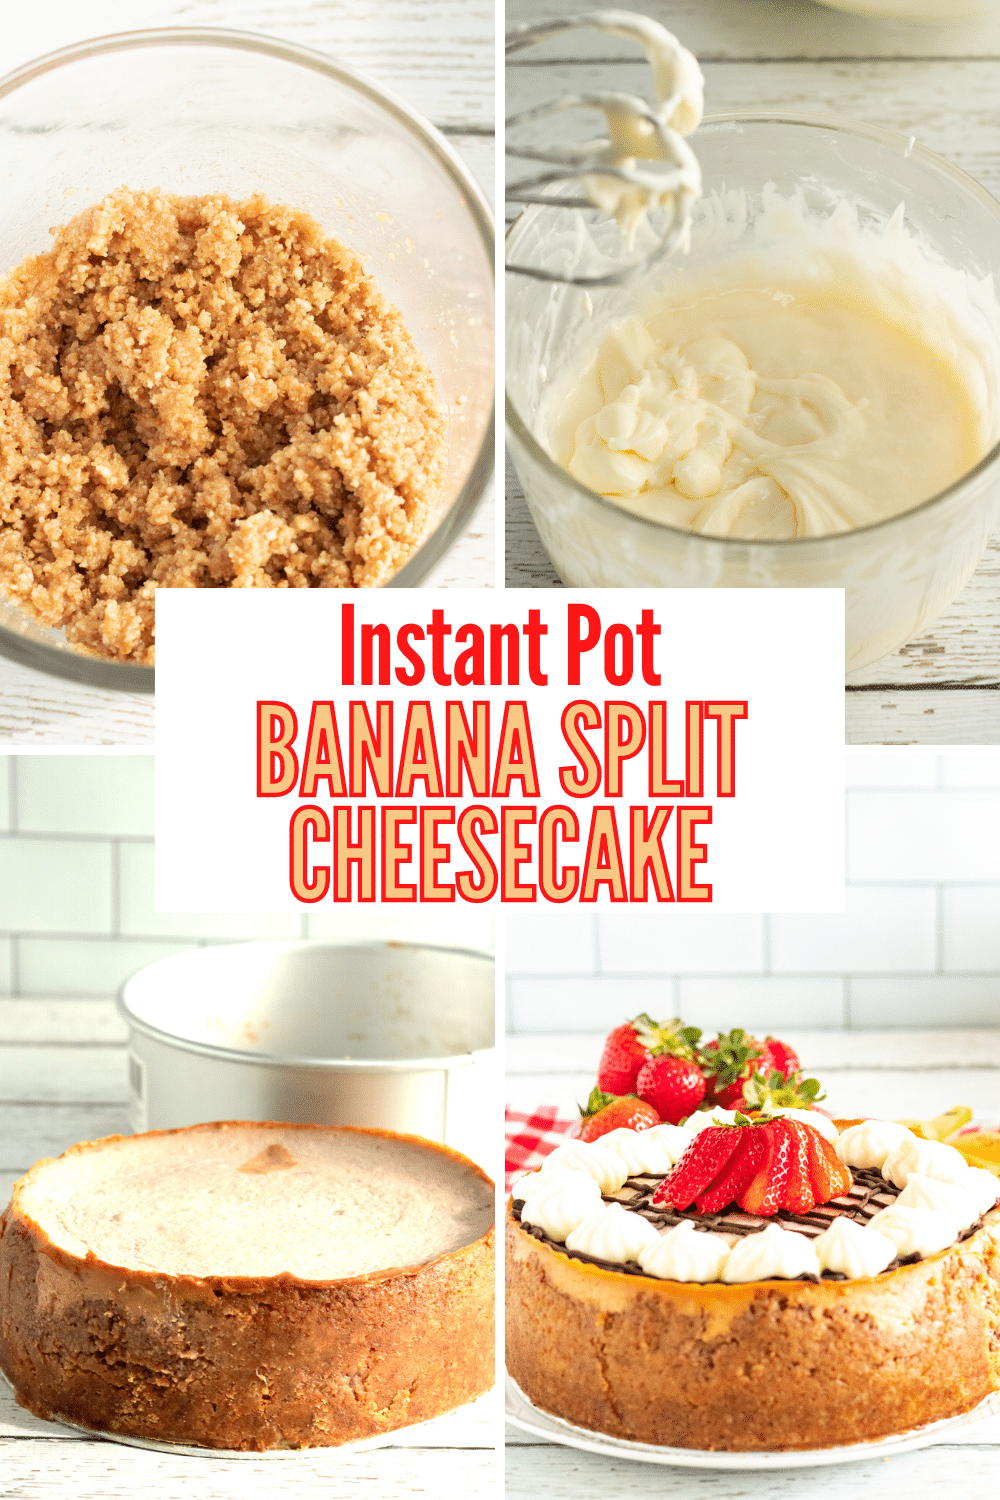 Instant Pot Banana Split Cheesecake is about to make you forget that other cheesecakes exist. The flavor of this cheesecake recipe rocks. #instantpot #pressurecooker #bananasplit #cheesecake #recipe via @wondermomwannab